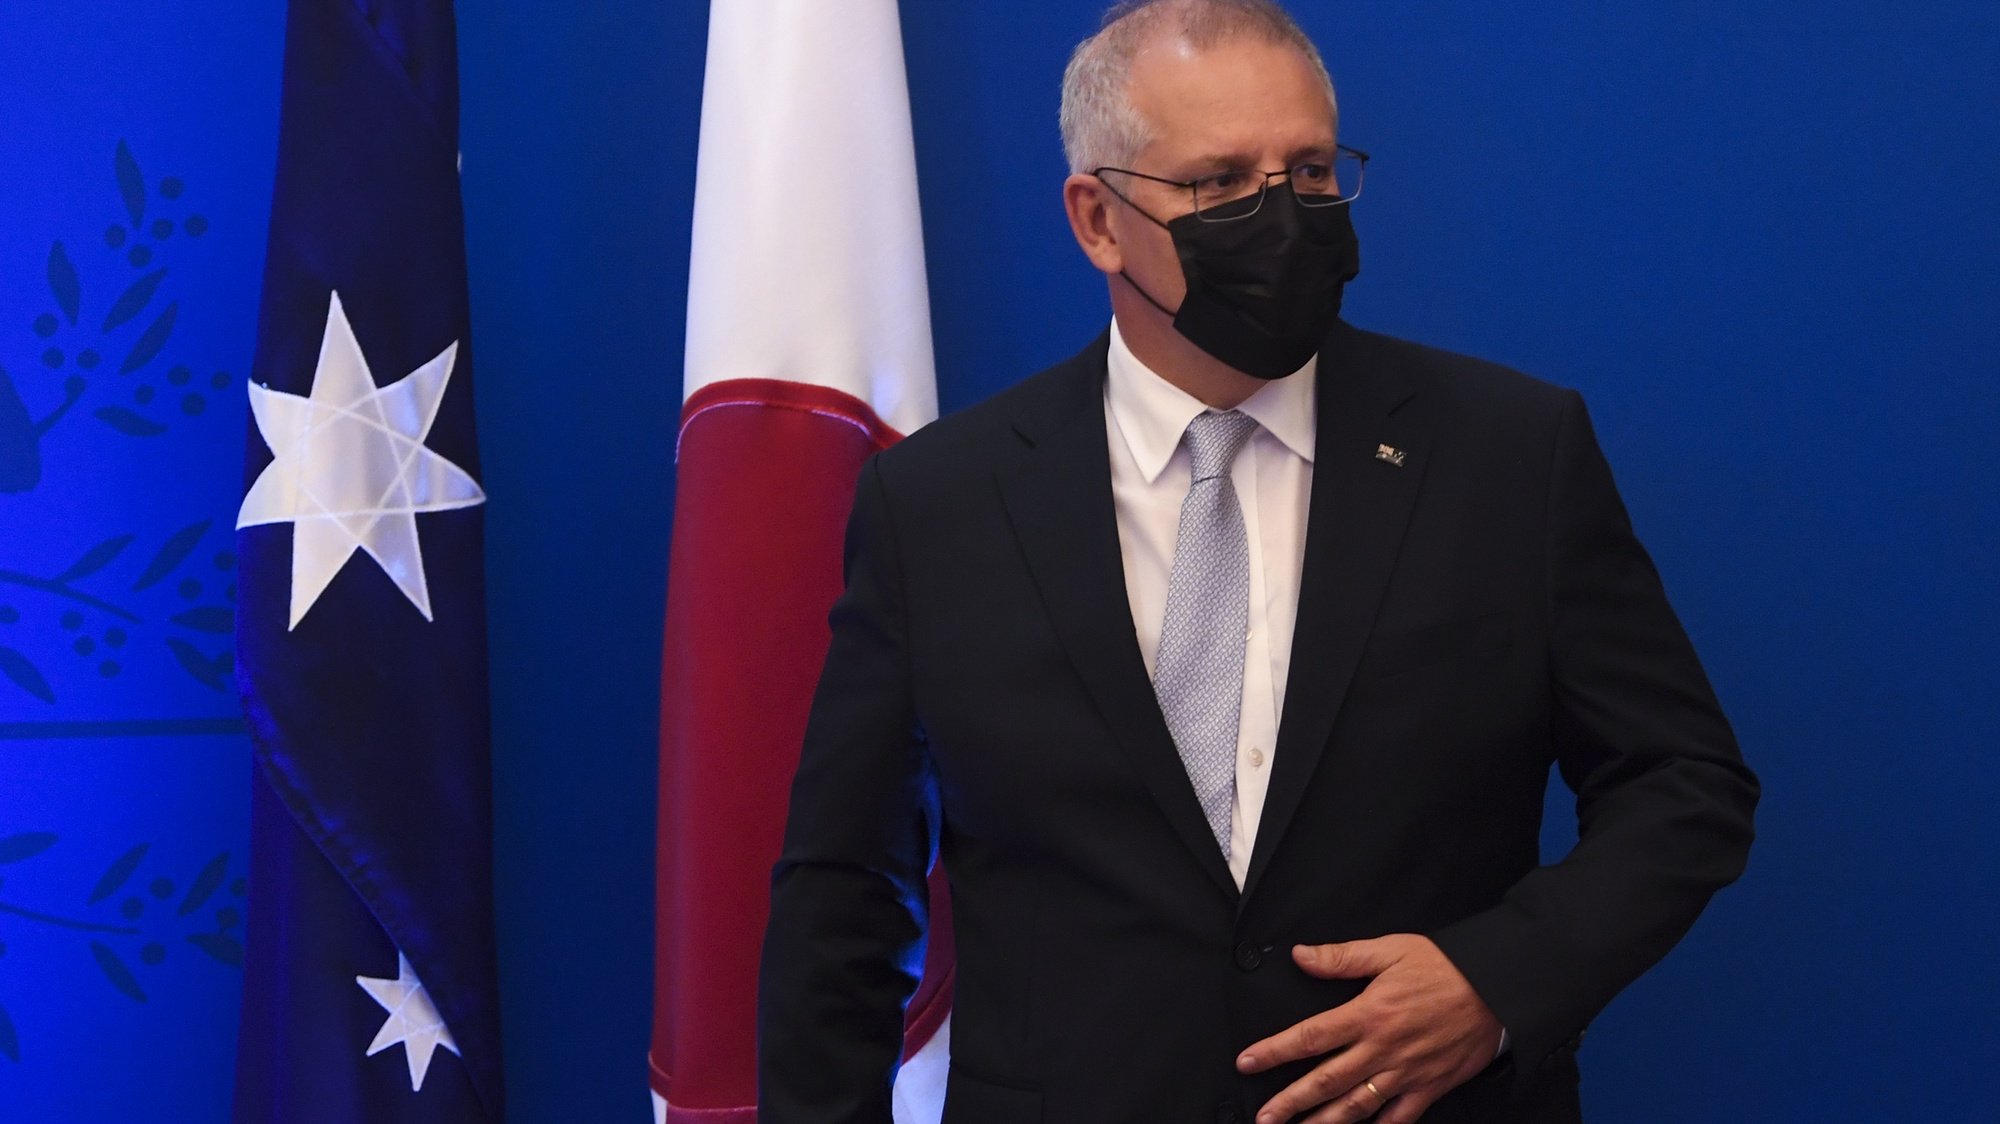 epa09668922 Australian Prime Minister Scott Morrison ahead of a virtual treaty signing summit with Japanese Prime Minister Fumio Kishida, at Parliament House, in Canberra, Australia, 06 January 2022. The meeting between Morrison and Kishida will outline a framework for future defence cooperation in the region.  EPA/LUKAS COCH  AUSTRALIA AND NEW ZEALAND OUT